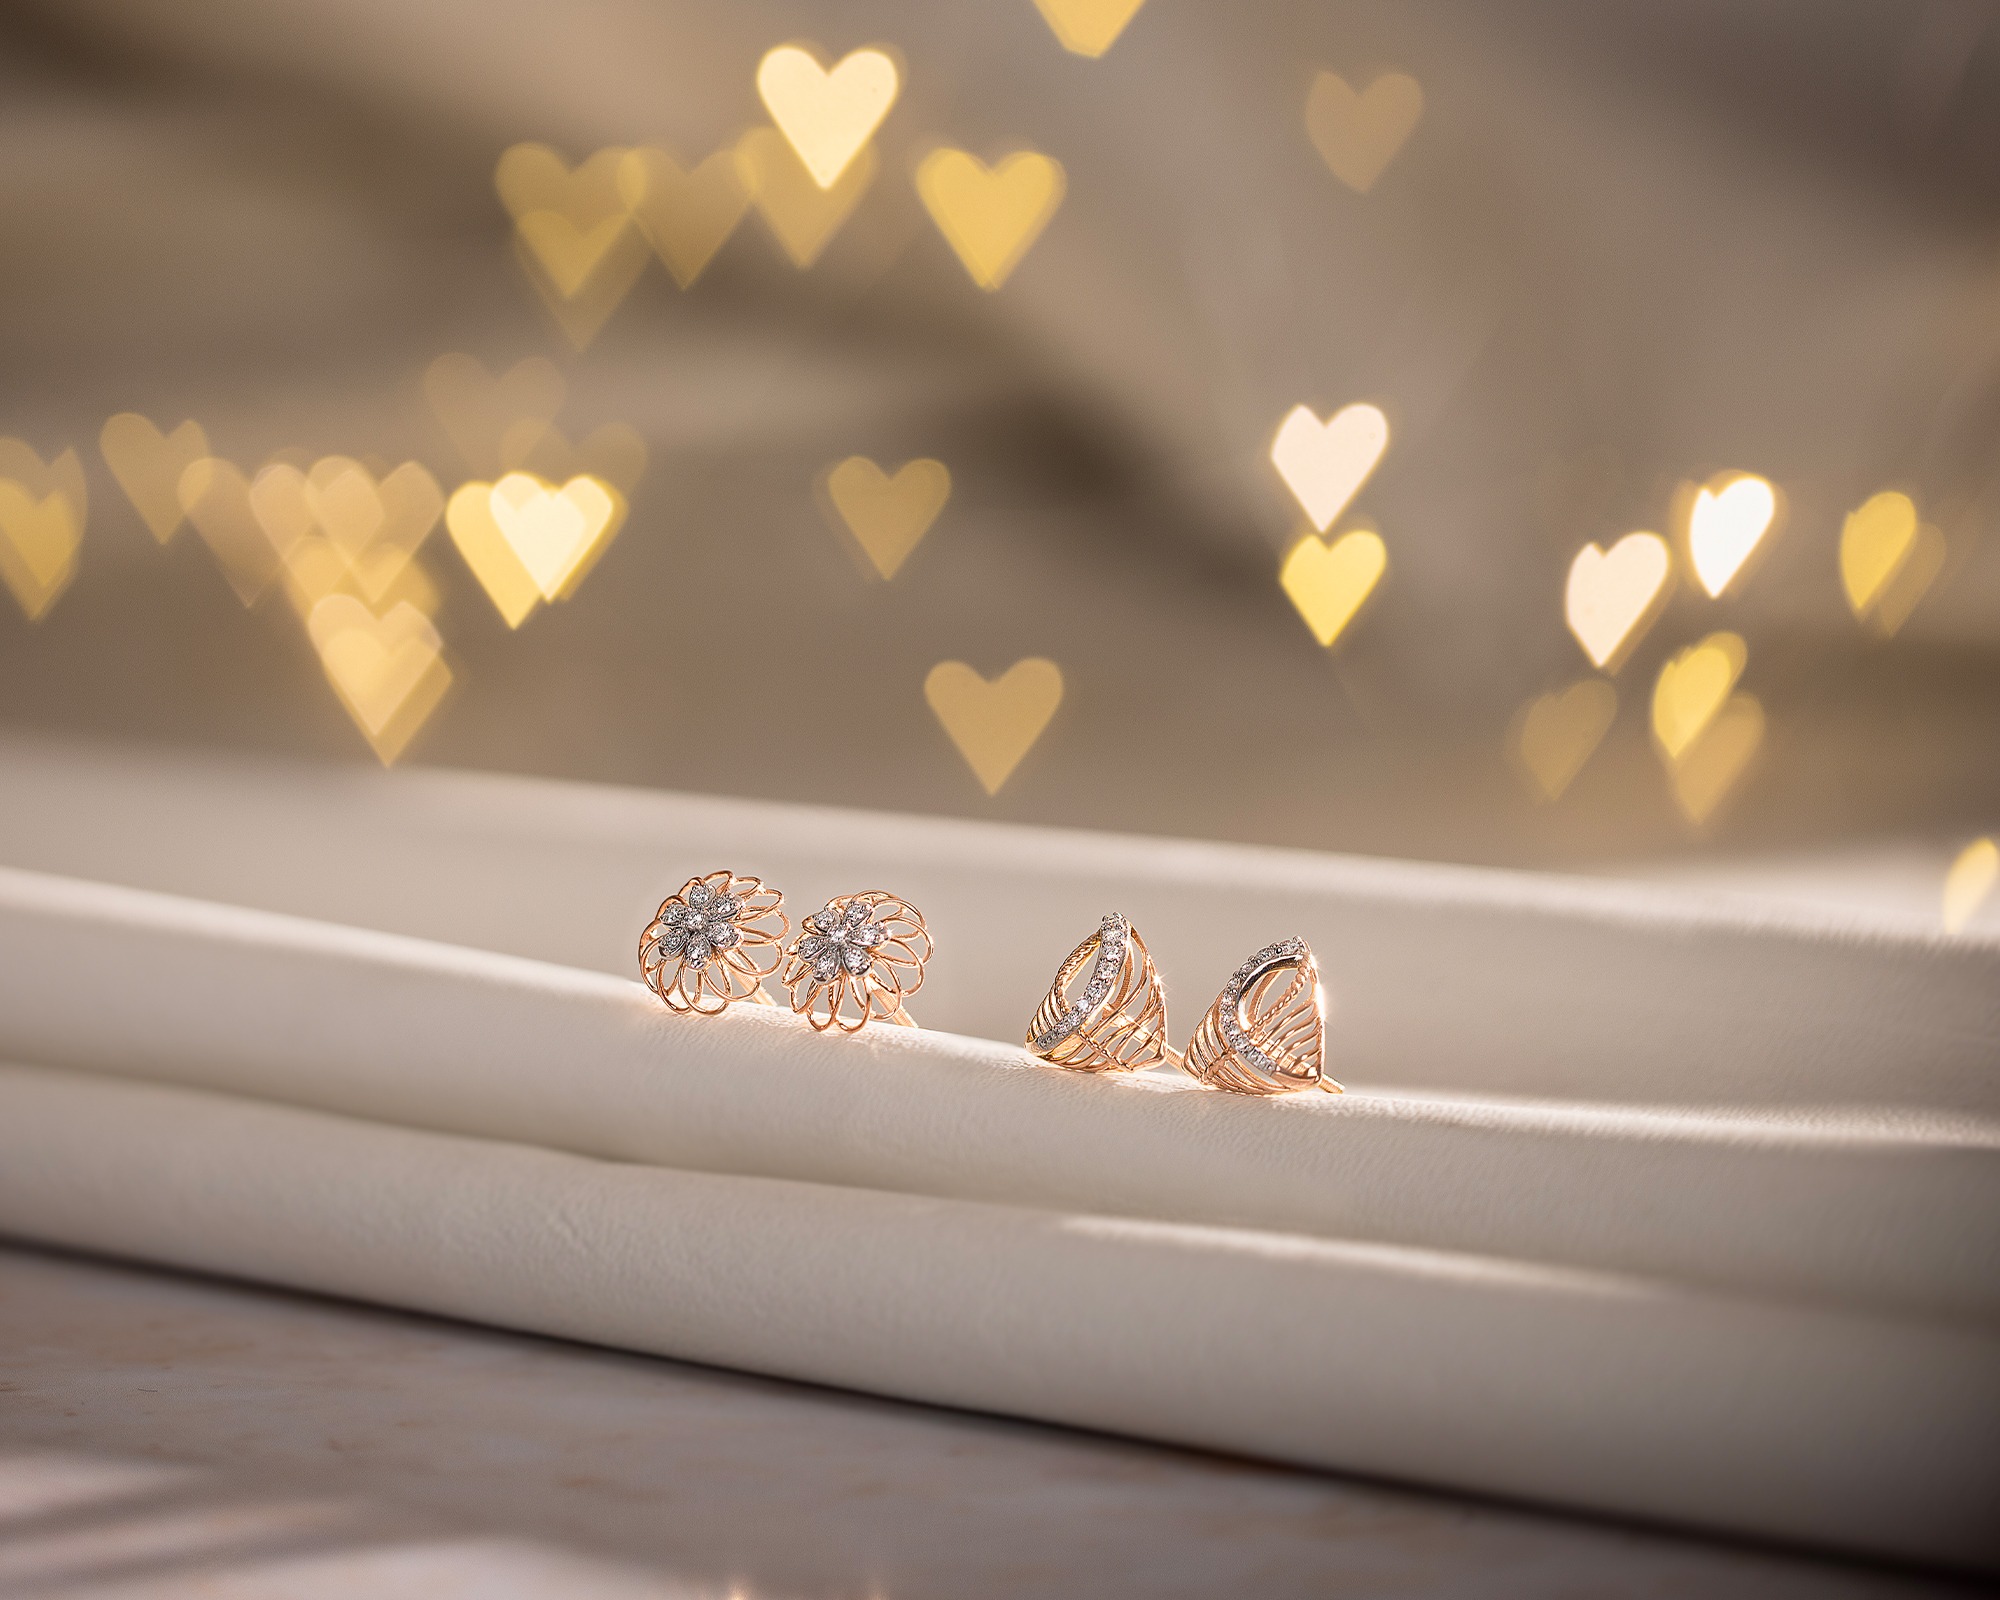 Valentines day jewellery gifts